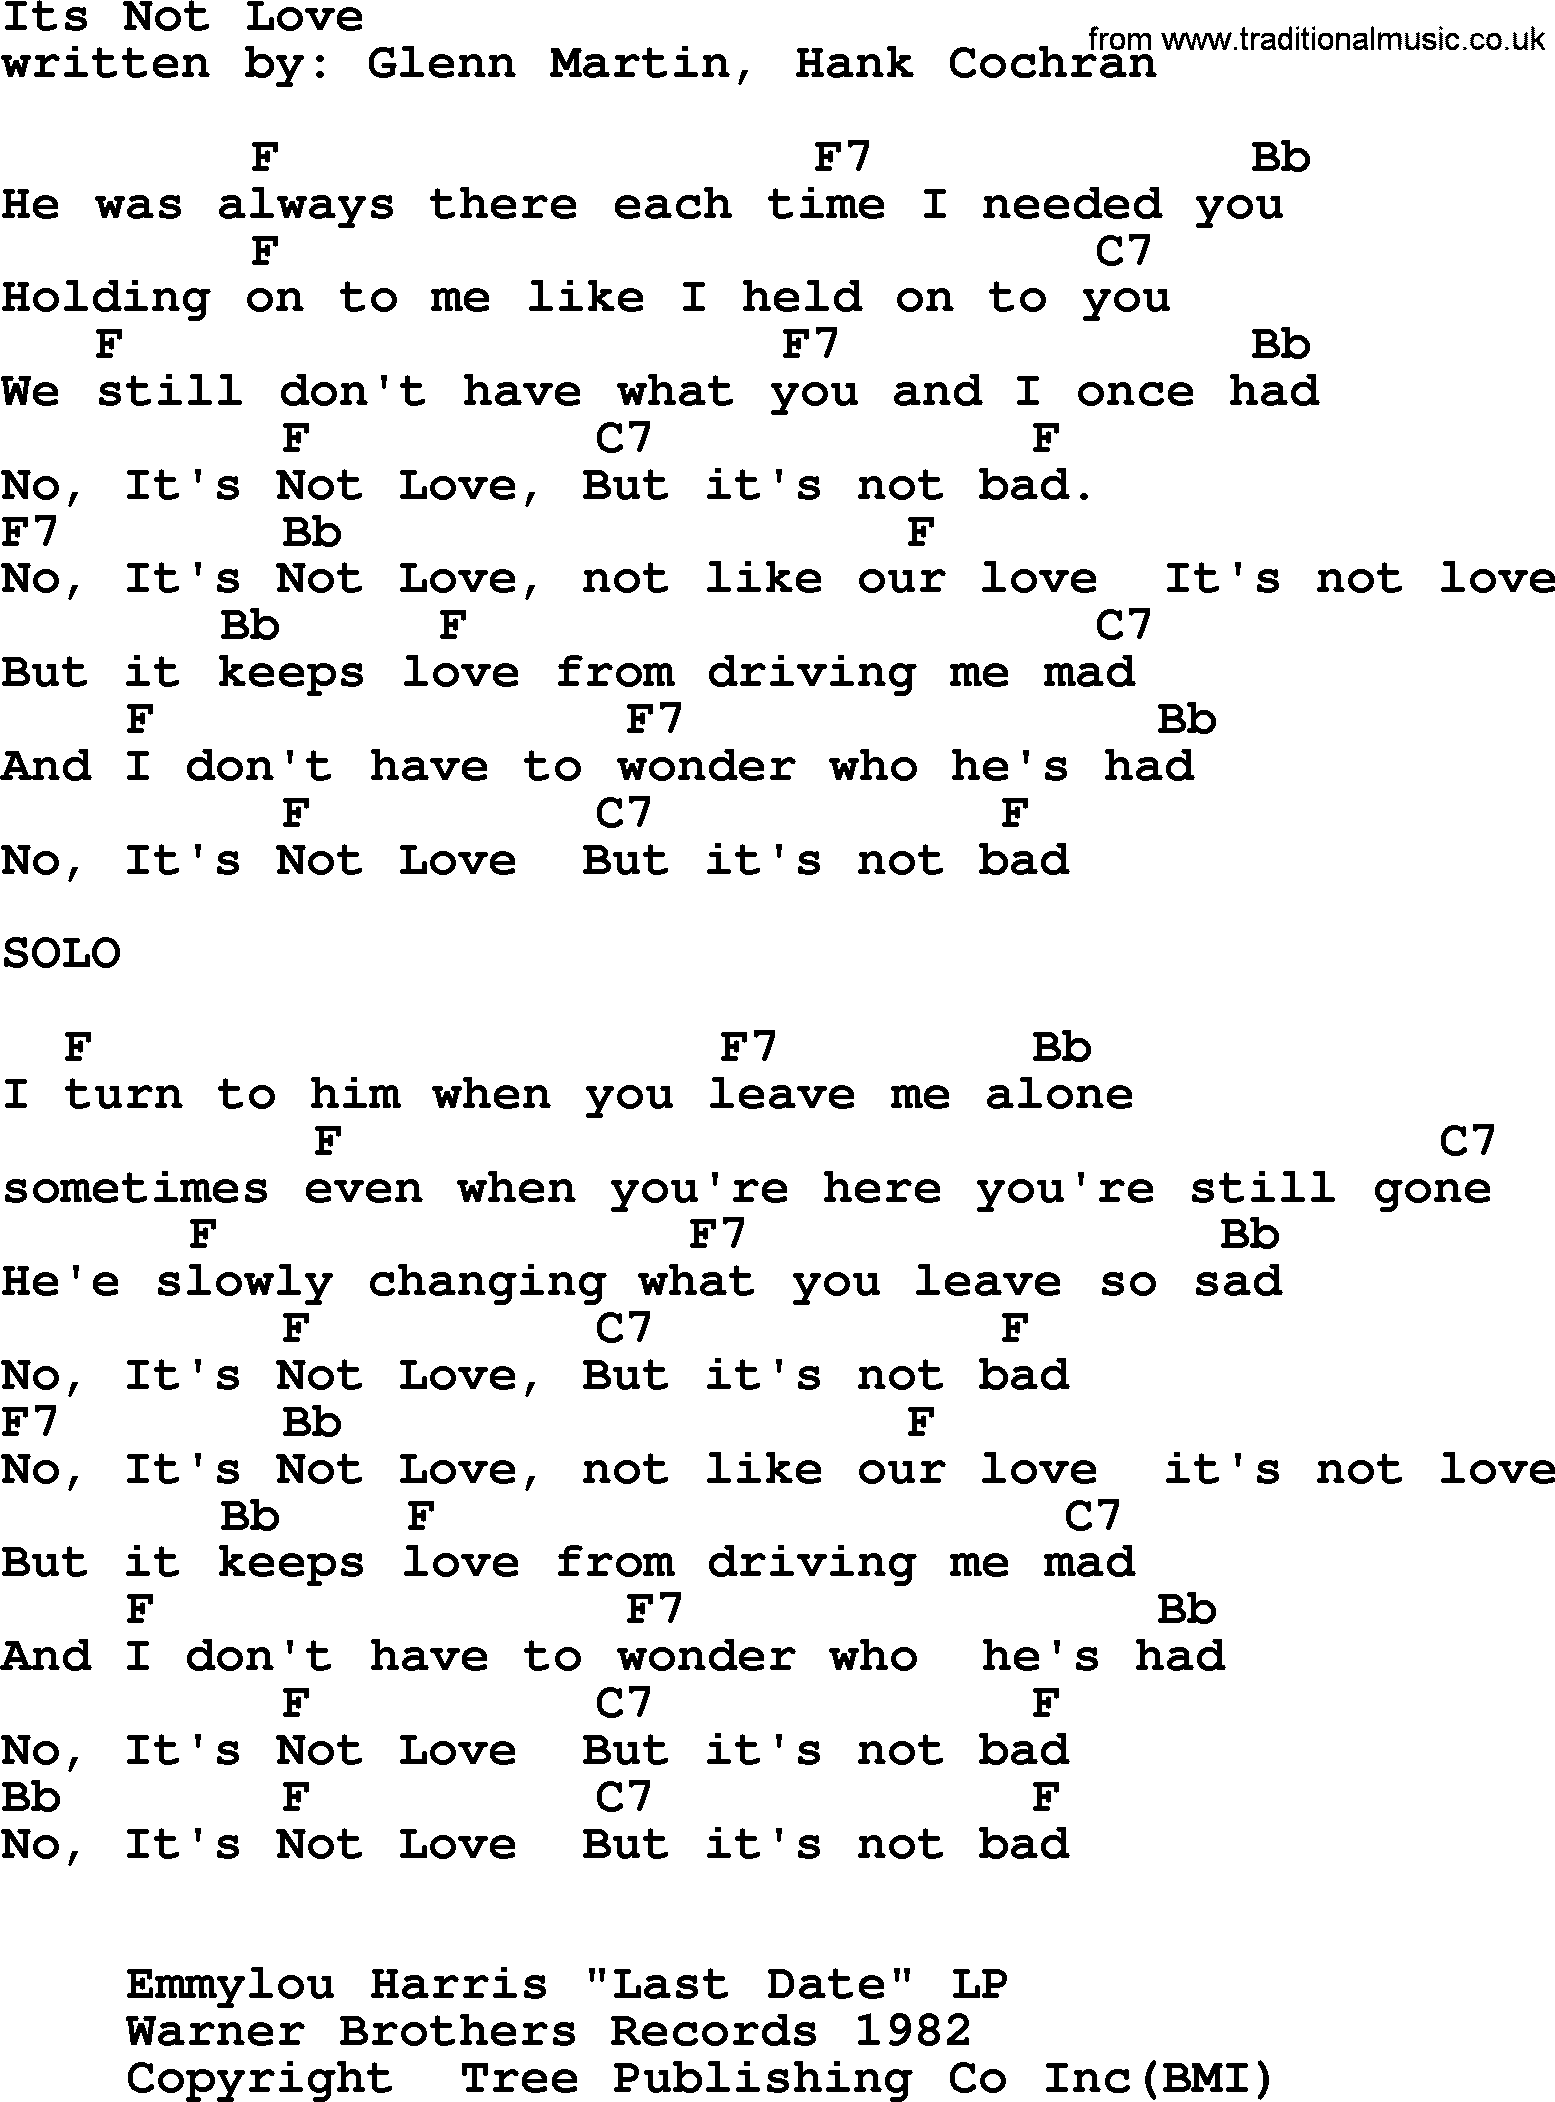 Emmylou Harris song: Its Not Love lyrics and chords